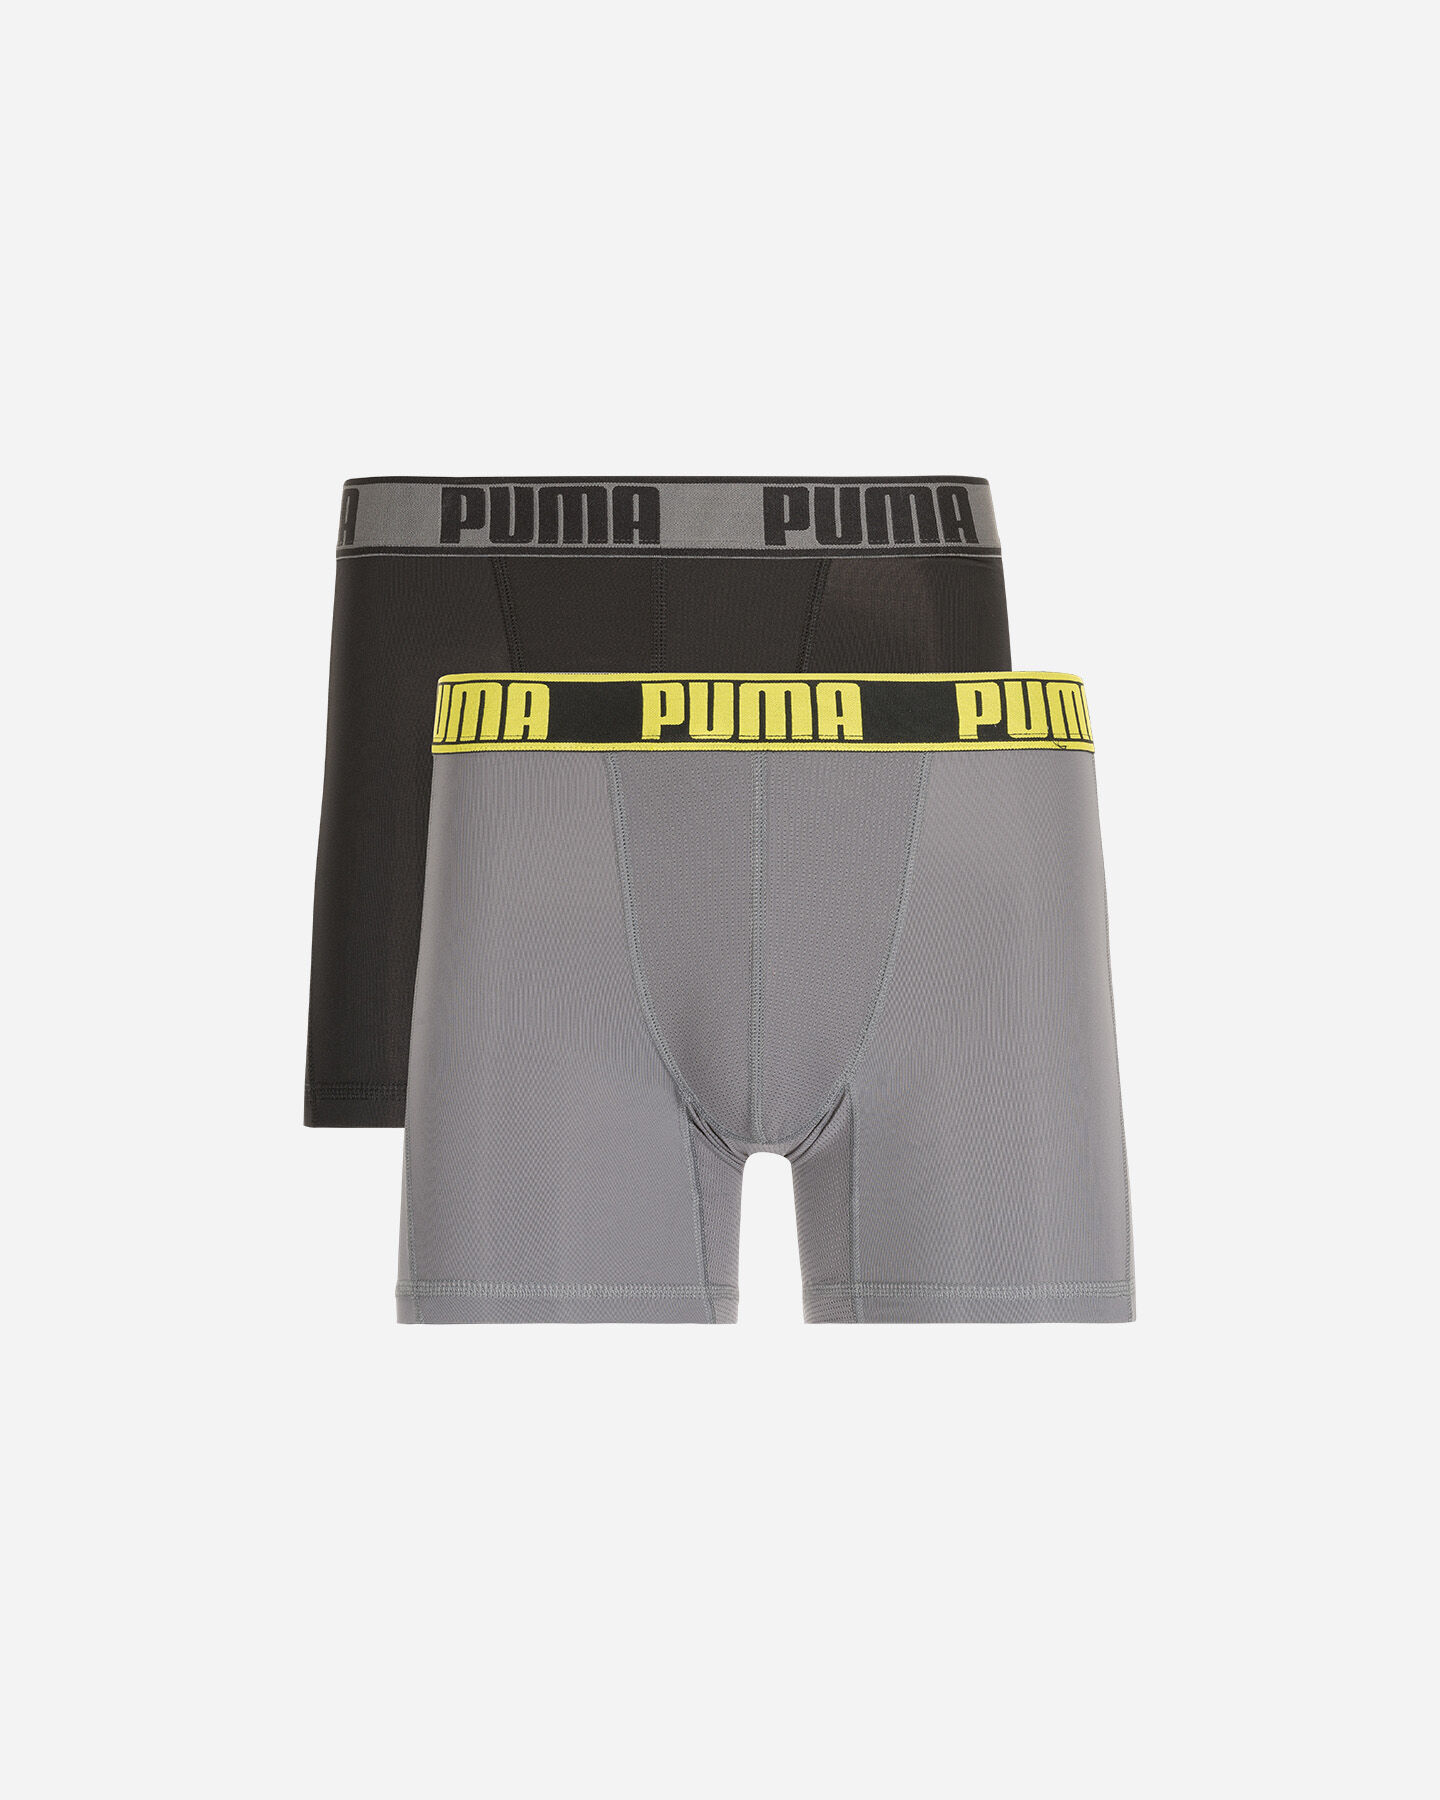  Intimo PUMA 2 PACK BOXER ACTIVE PACKED M S4076476|319|010 scatto 0